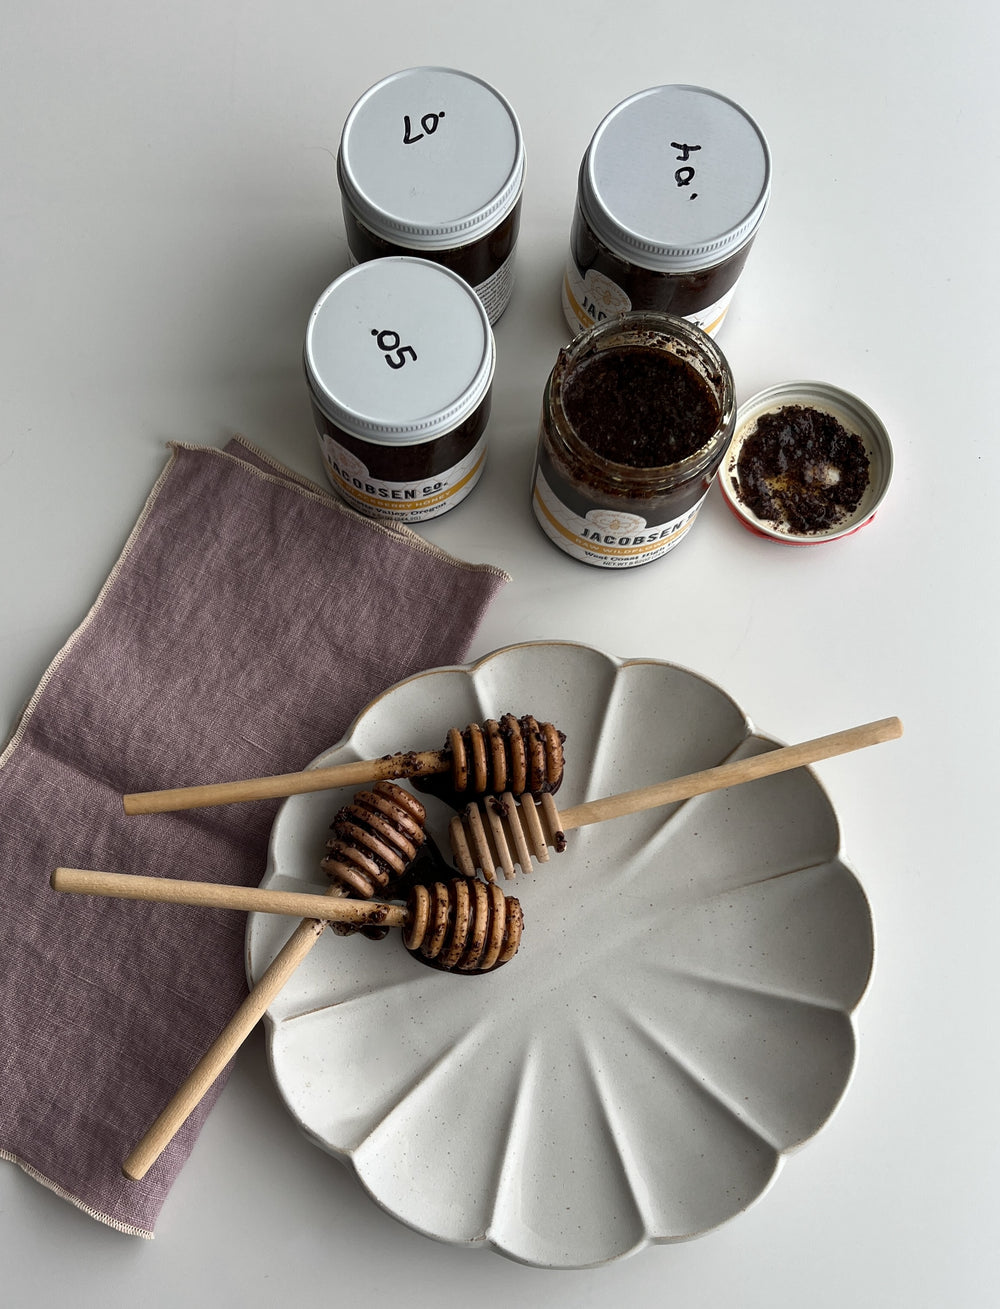 What We're Making: Infused Honey